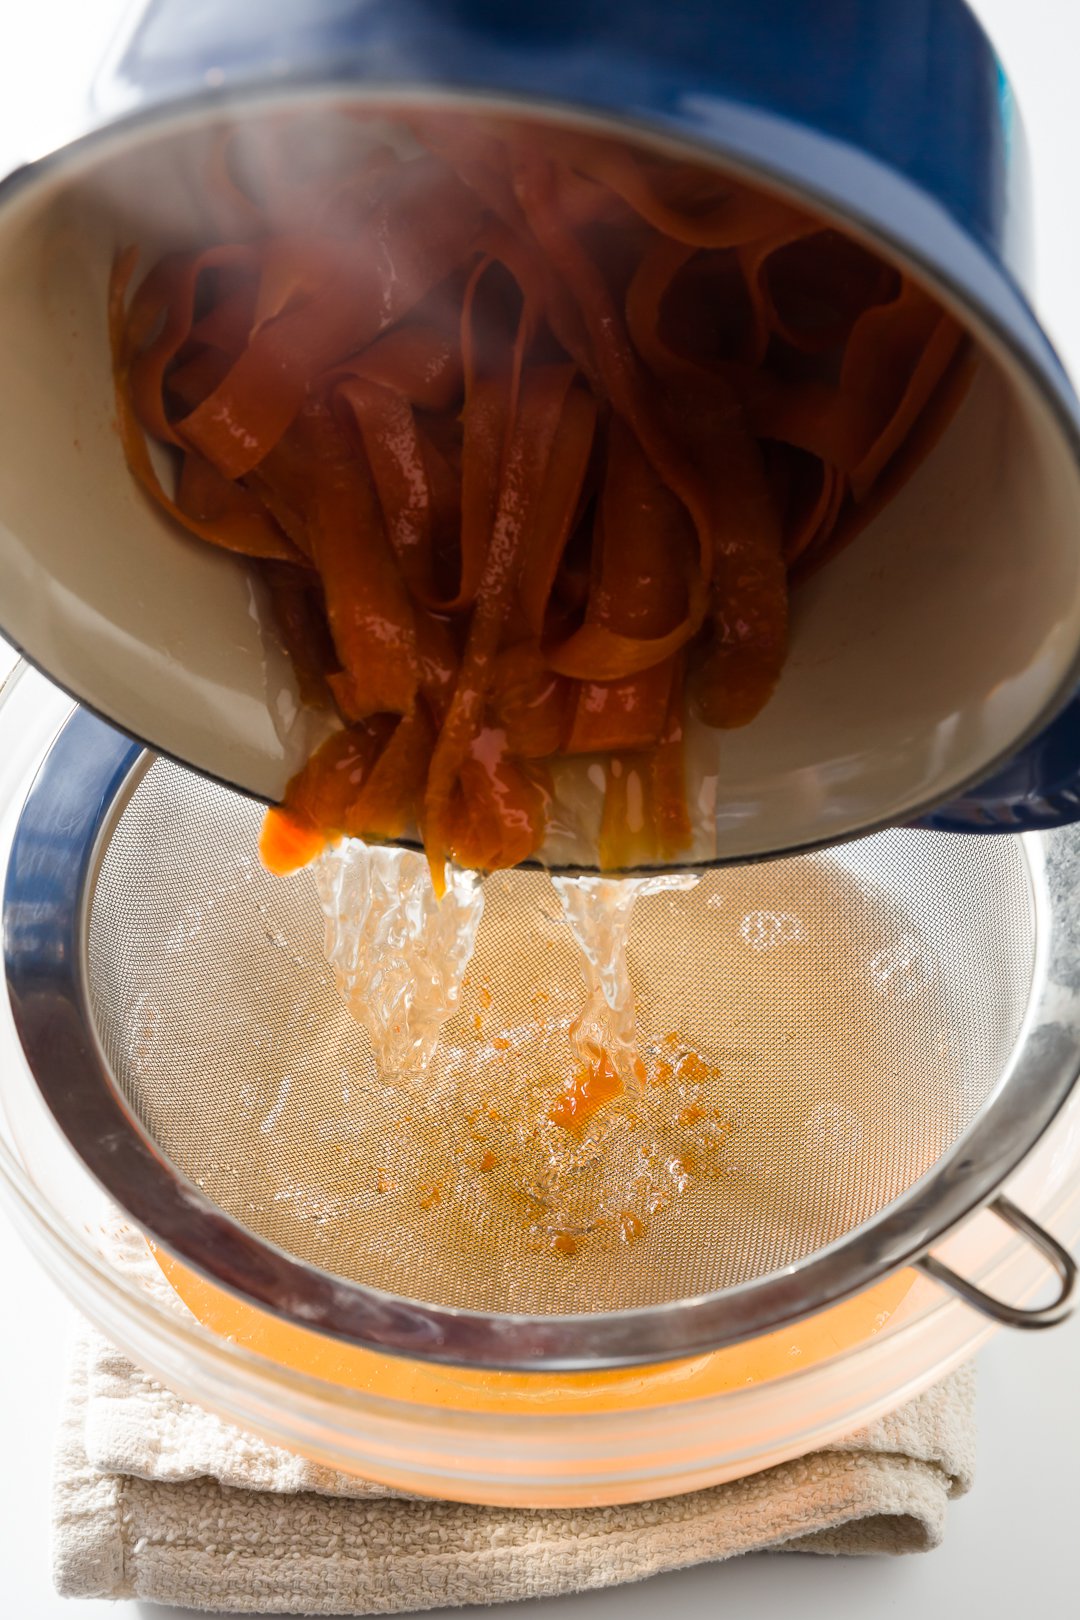 Pouring carrot ribbons into a strainer over a bowl.